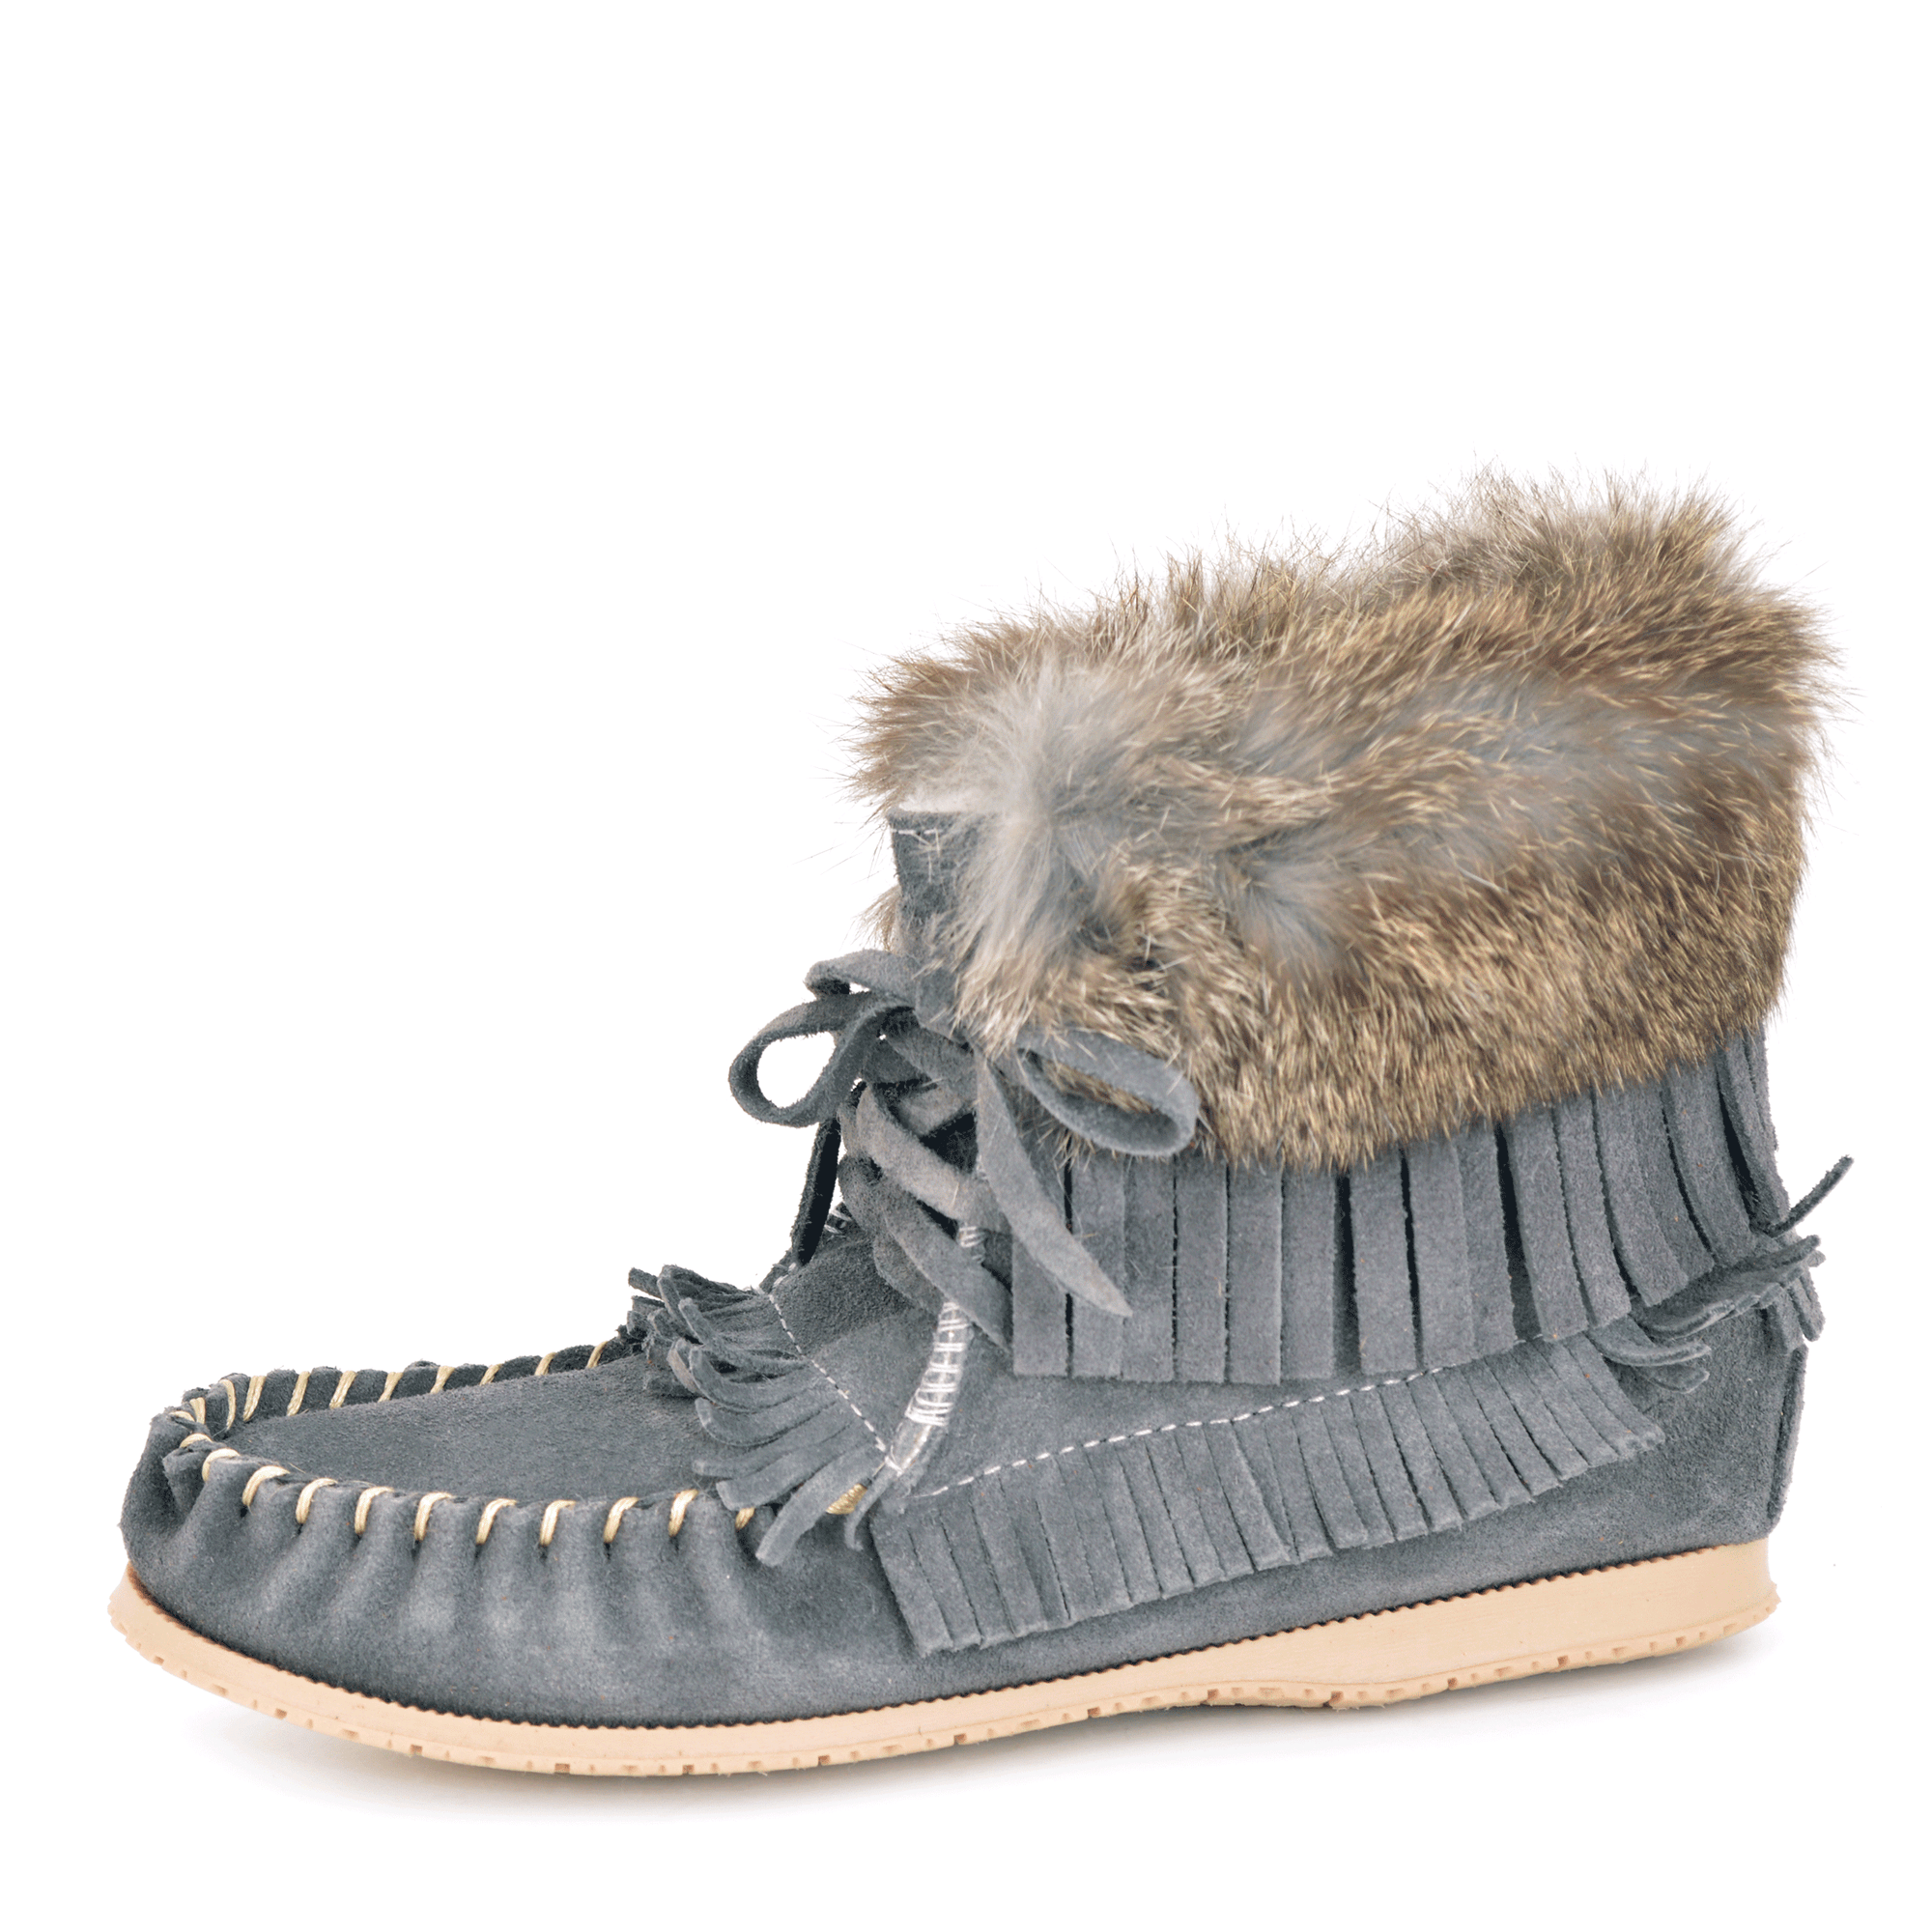 Loo Moccasin for Women - Grey 